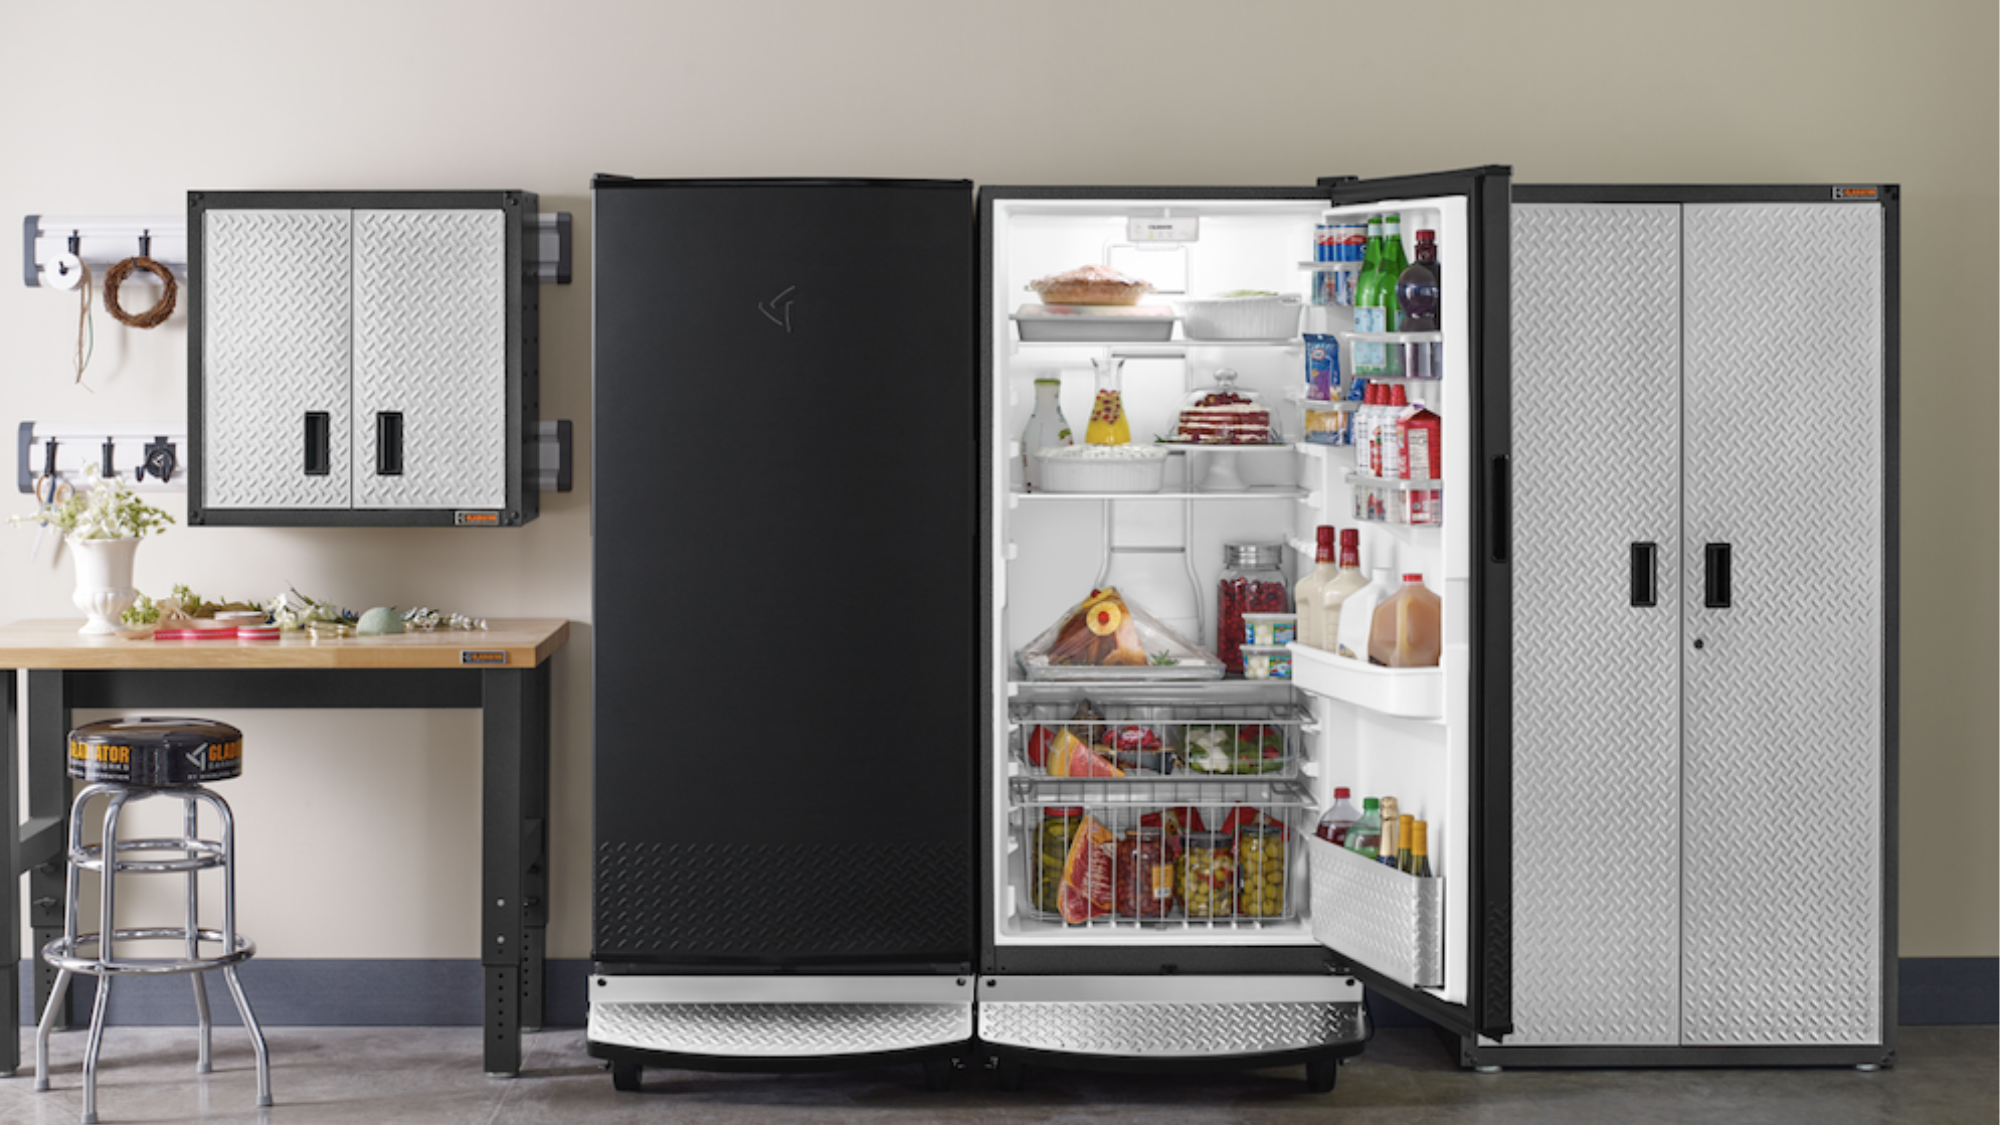 Chest & Deep Freezer Prices + Installation Costs [2024] - HomeGuide